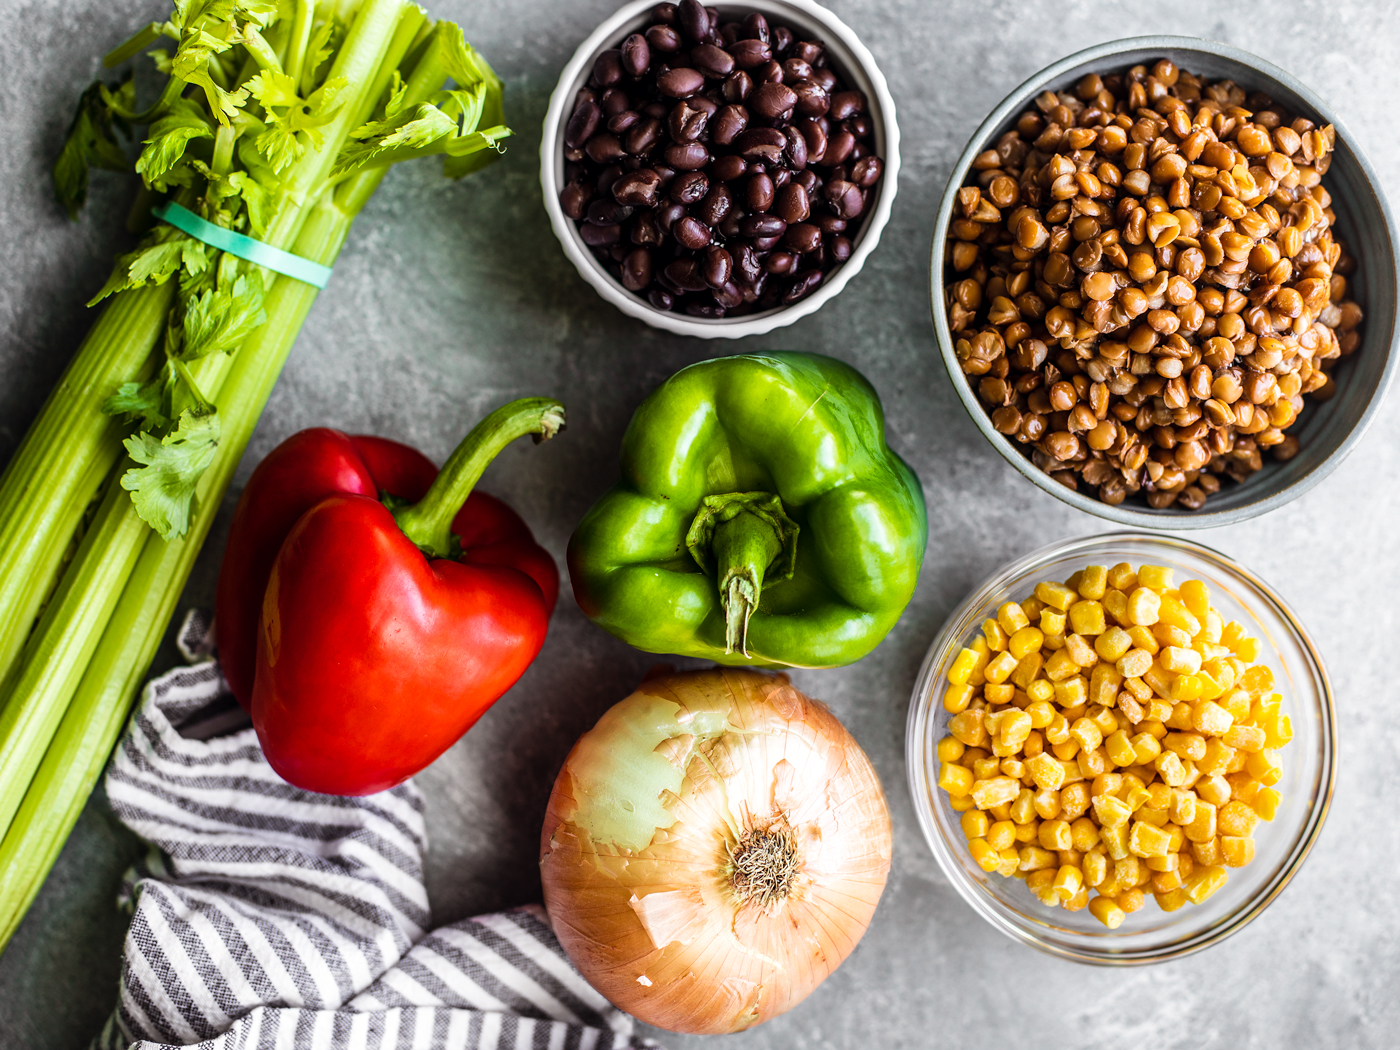 Celery, red bell pepper, green bell pepper, onion, and bowls of black beans, lentils, and corn on a gray background.